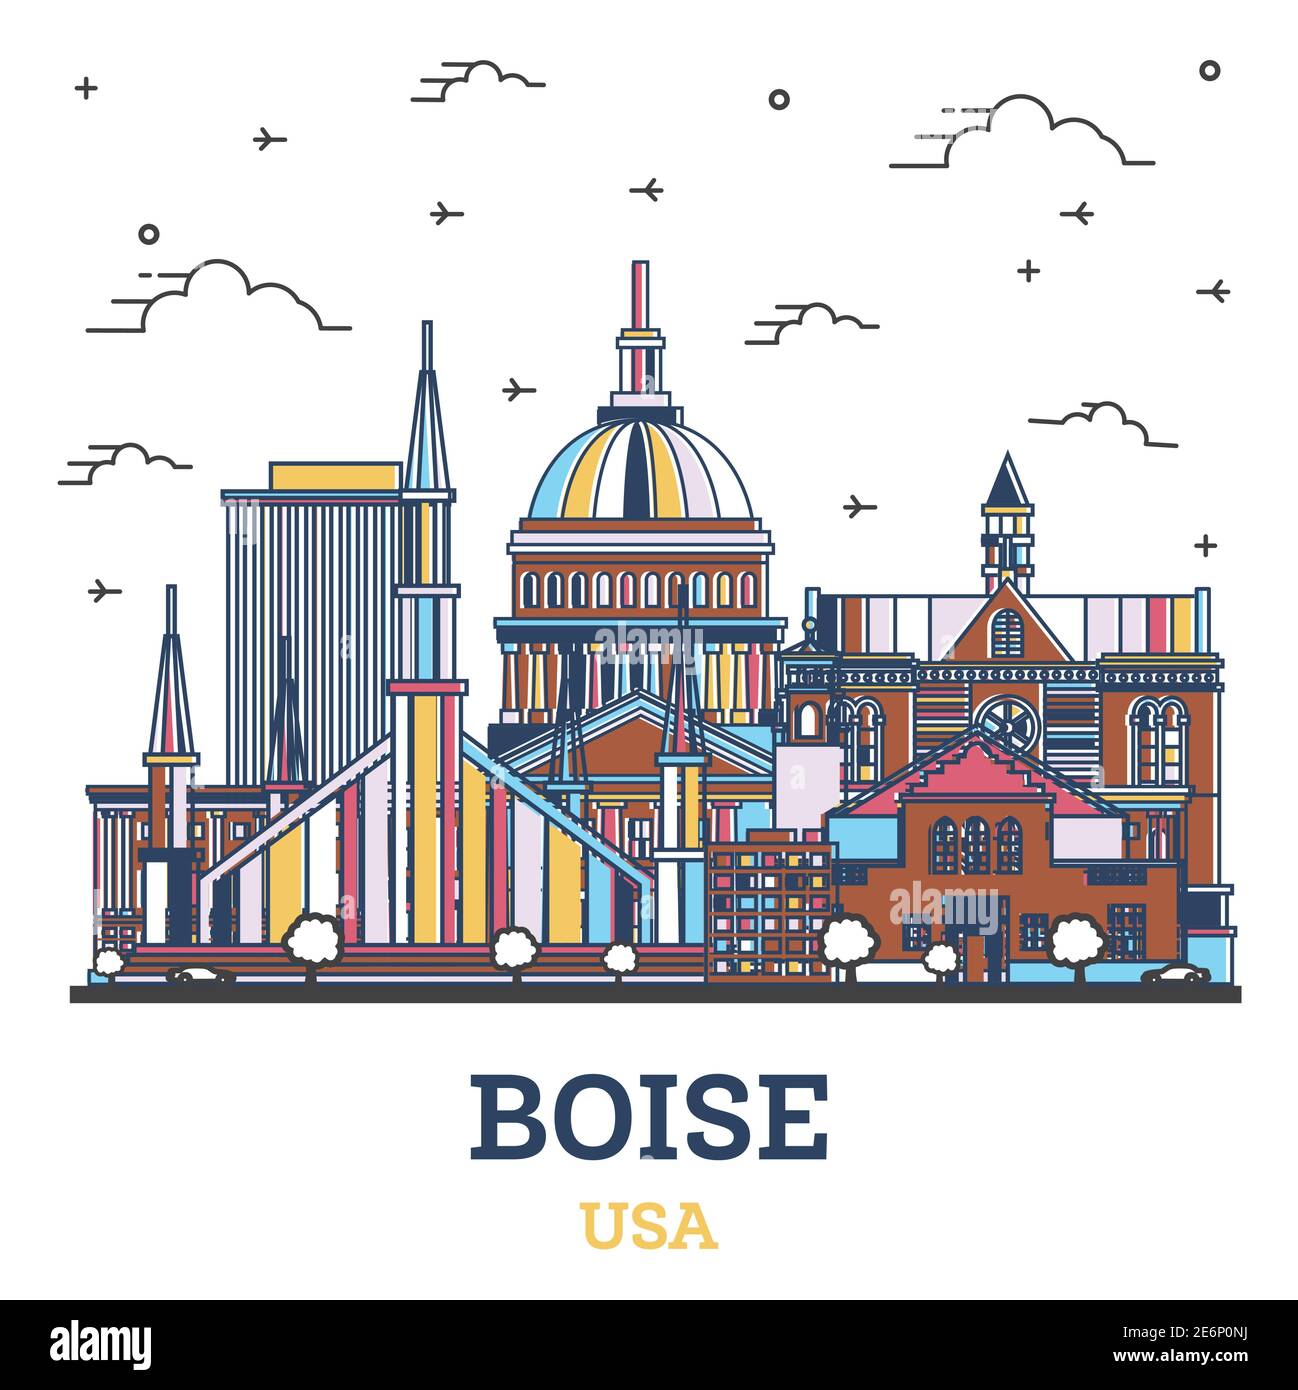 Outline Boise Idaho City Skyline with Colored Modern Buildings Isolated on White. Vector Illustration. Boise USA Cityscape with Landmarks. Stock Vector